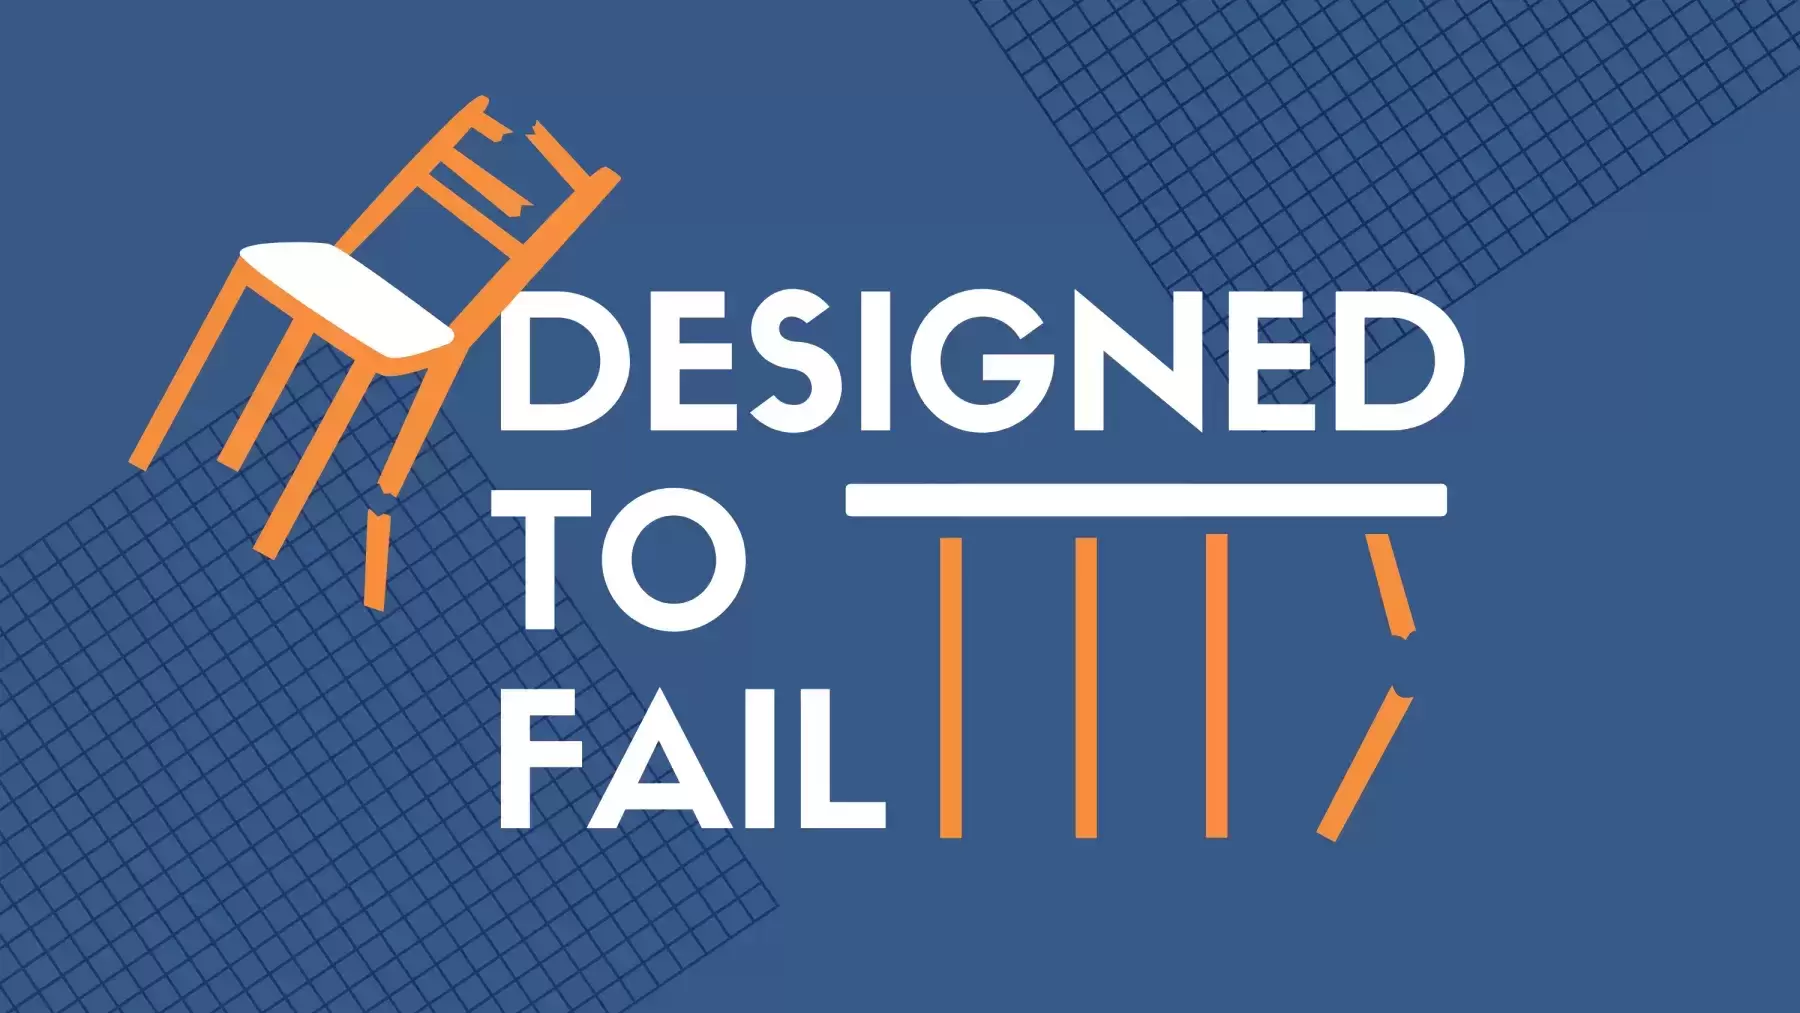 A graphical image of the words "Designed to Fail" with a broken table and broken chair.